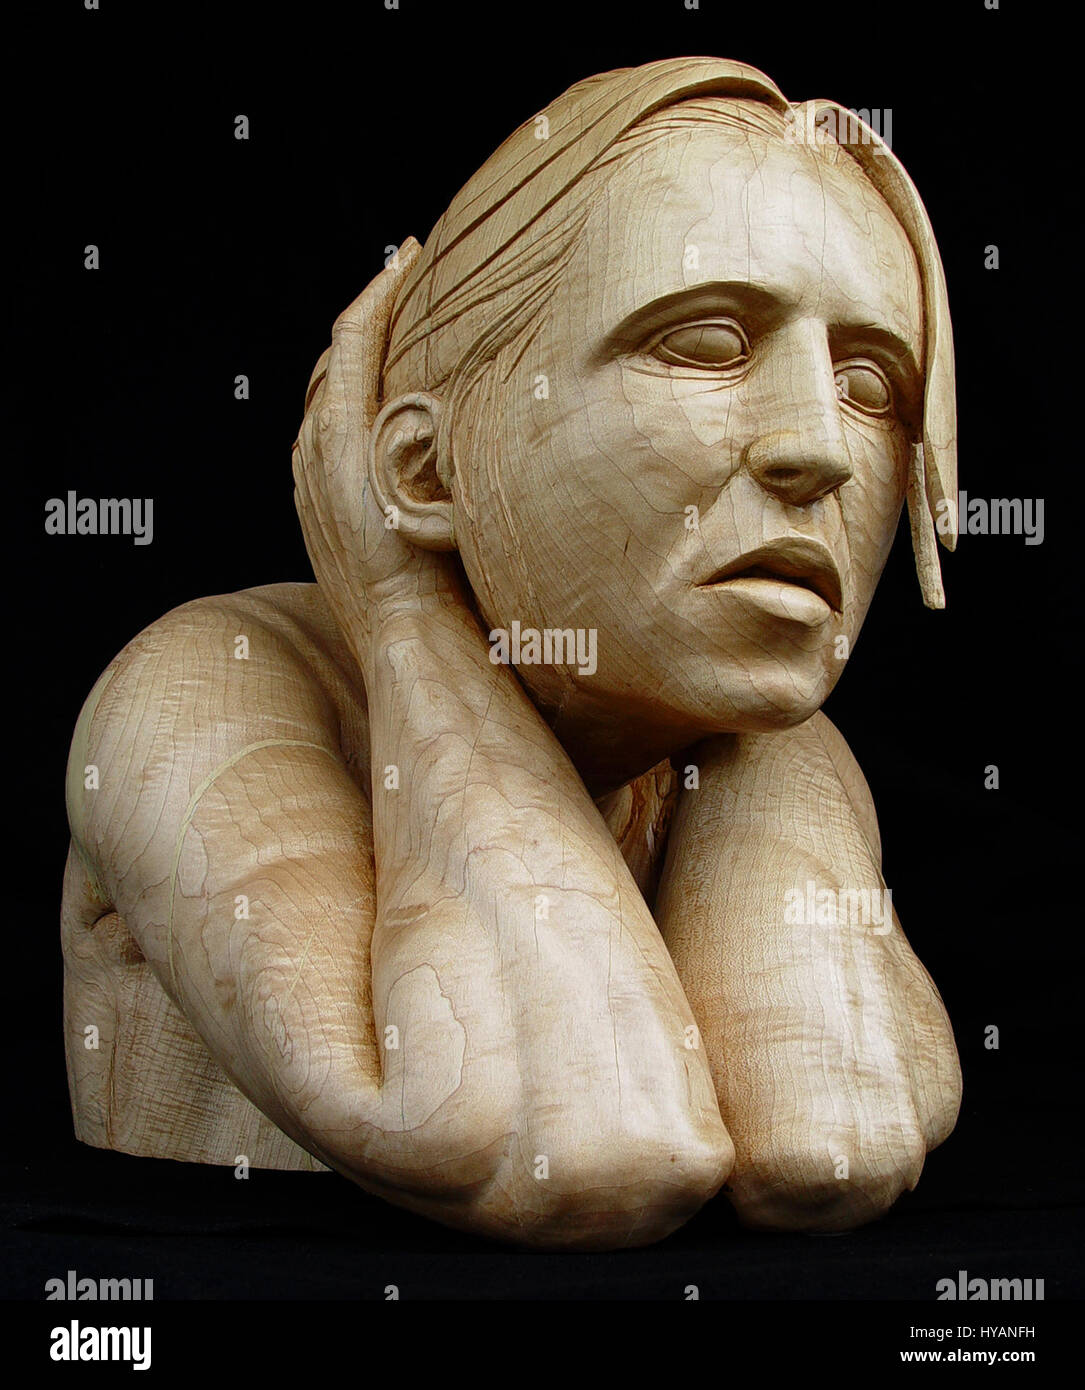 Oneonta, USA: A hand carved wooden sculpture called Ghastly Nights.  YOU WOODEN’ Adam and Eve how realistic these eye-popping carvings are. The works pictured here are amazing pieces carved entirely out of wood – and can take up to 1,000-hours to painstakingly complete. Inspired by stone sculptures while studying in Rome 27 years-ago, American sculptor Stefanie Rocknak (48), decided to transfer the skills of the stone masters to her favourite material - wood. Stock Photo